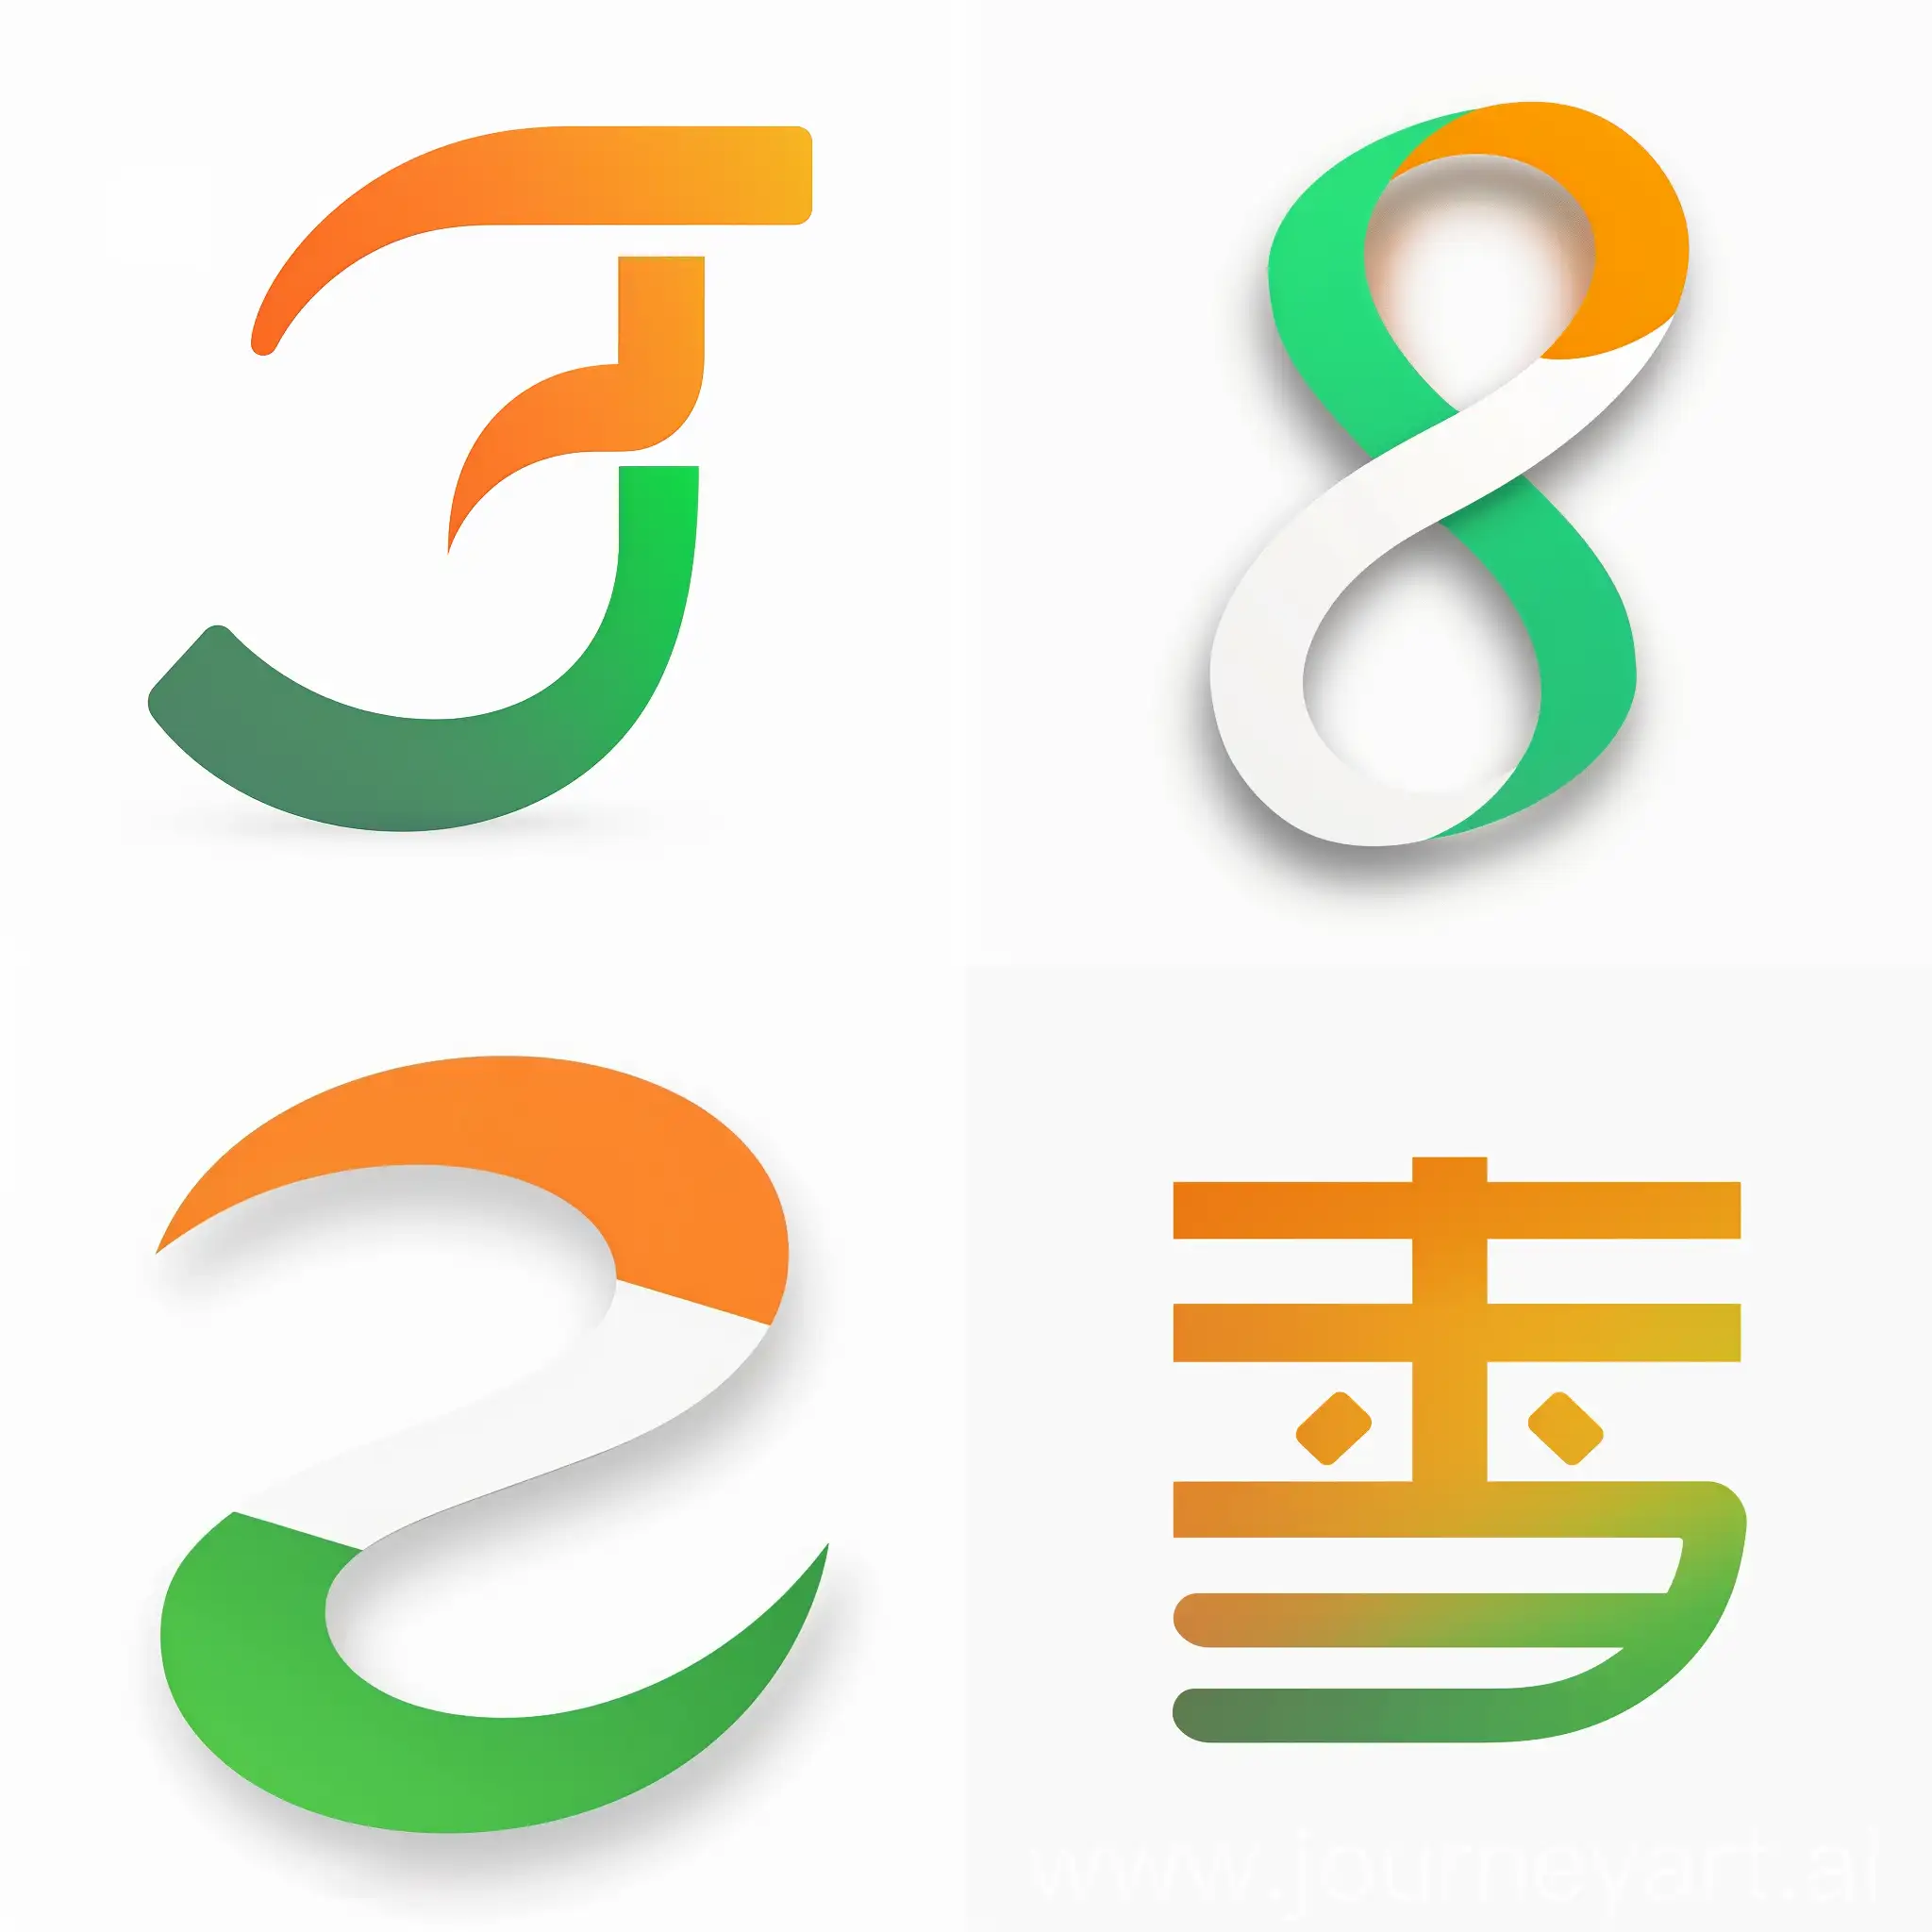 create a simple logo for app store using the letter "ऐ", white background, saffron at the top white at the middle, green at the bottom.